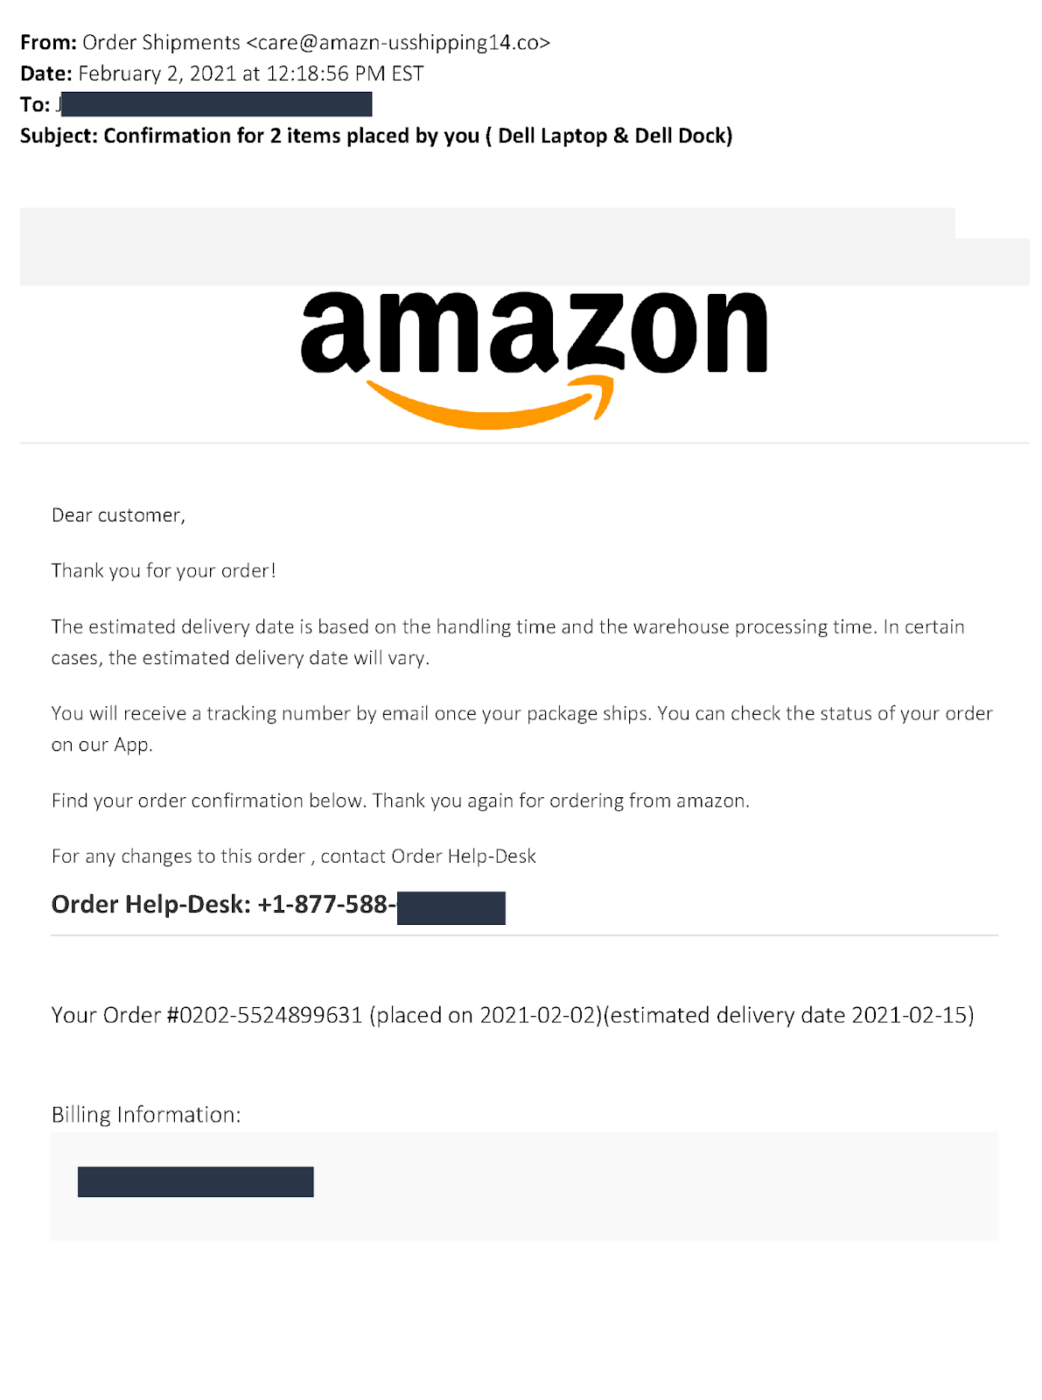 Order confirmation email example from Amazon